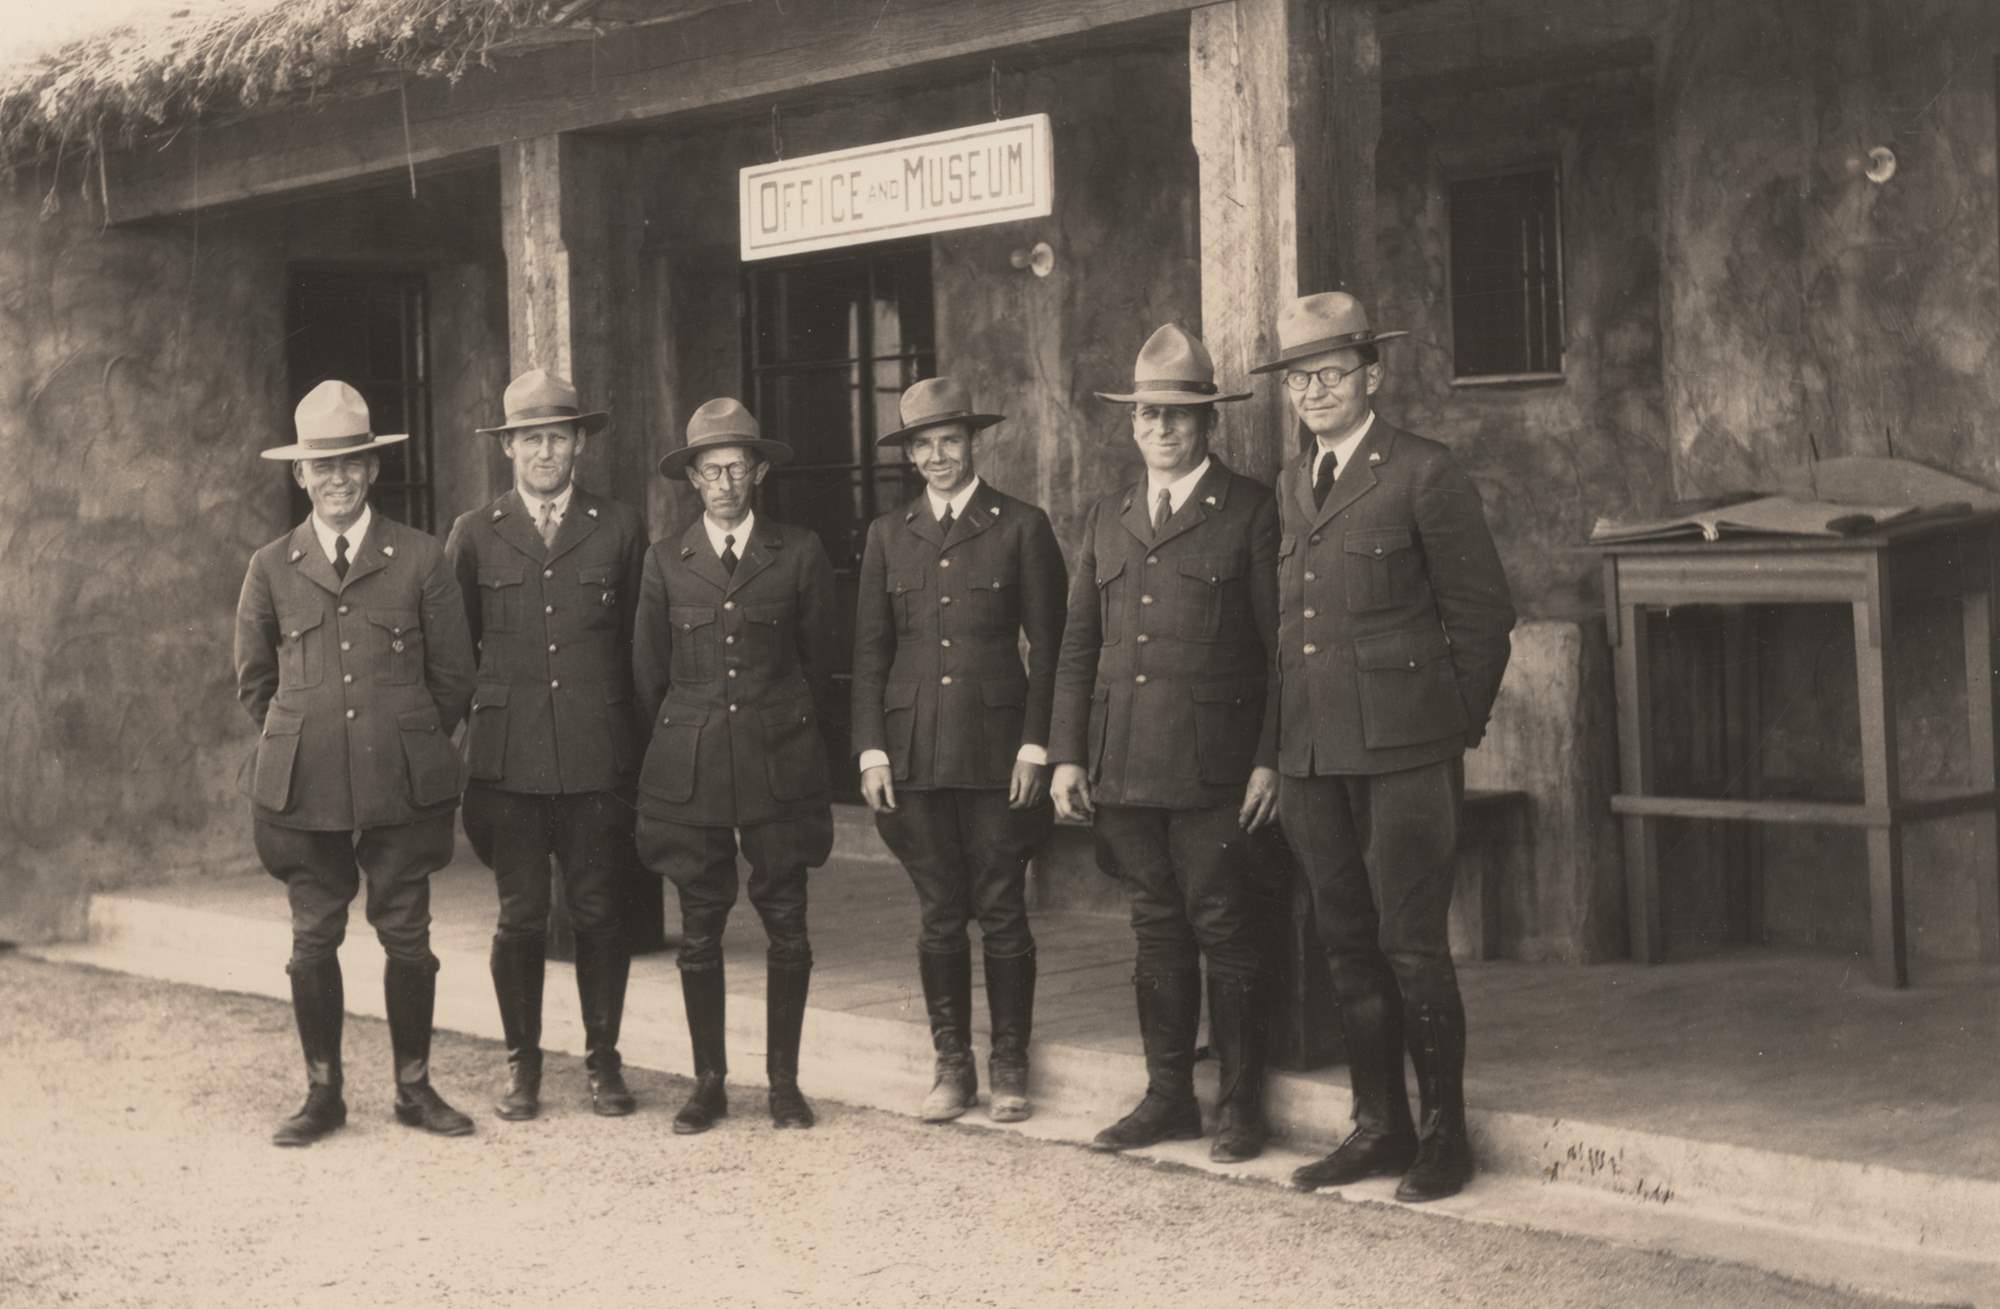 Six men stand in NPS uniforms with broad brim hats. Frank Pinkley wears a round superintendents badge and another ranger wears a shield-shaped badge.